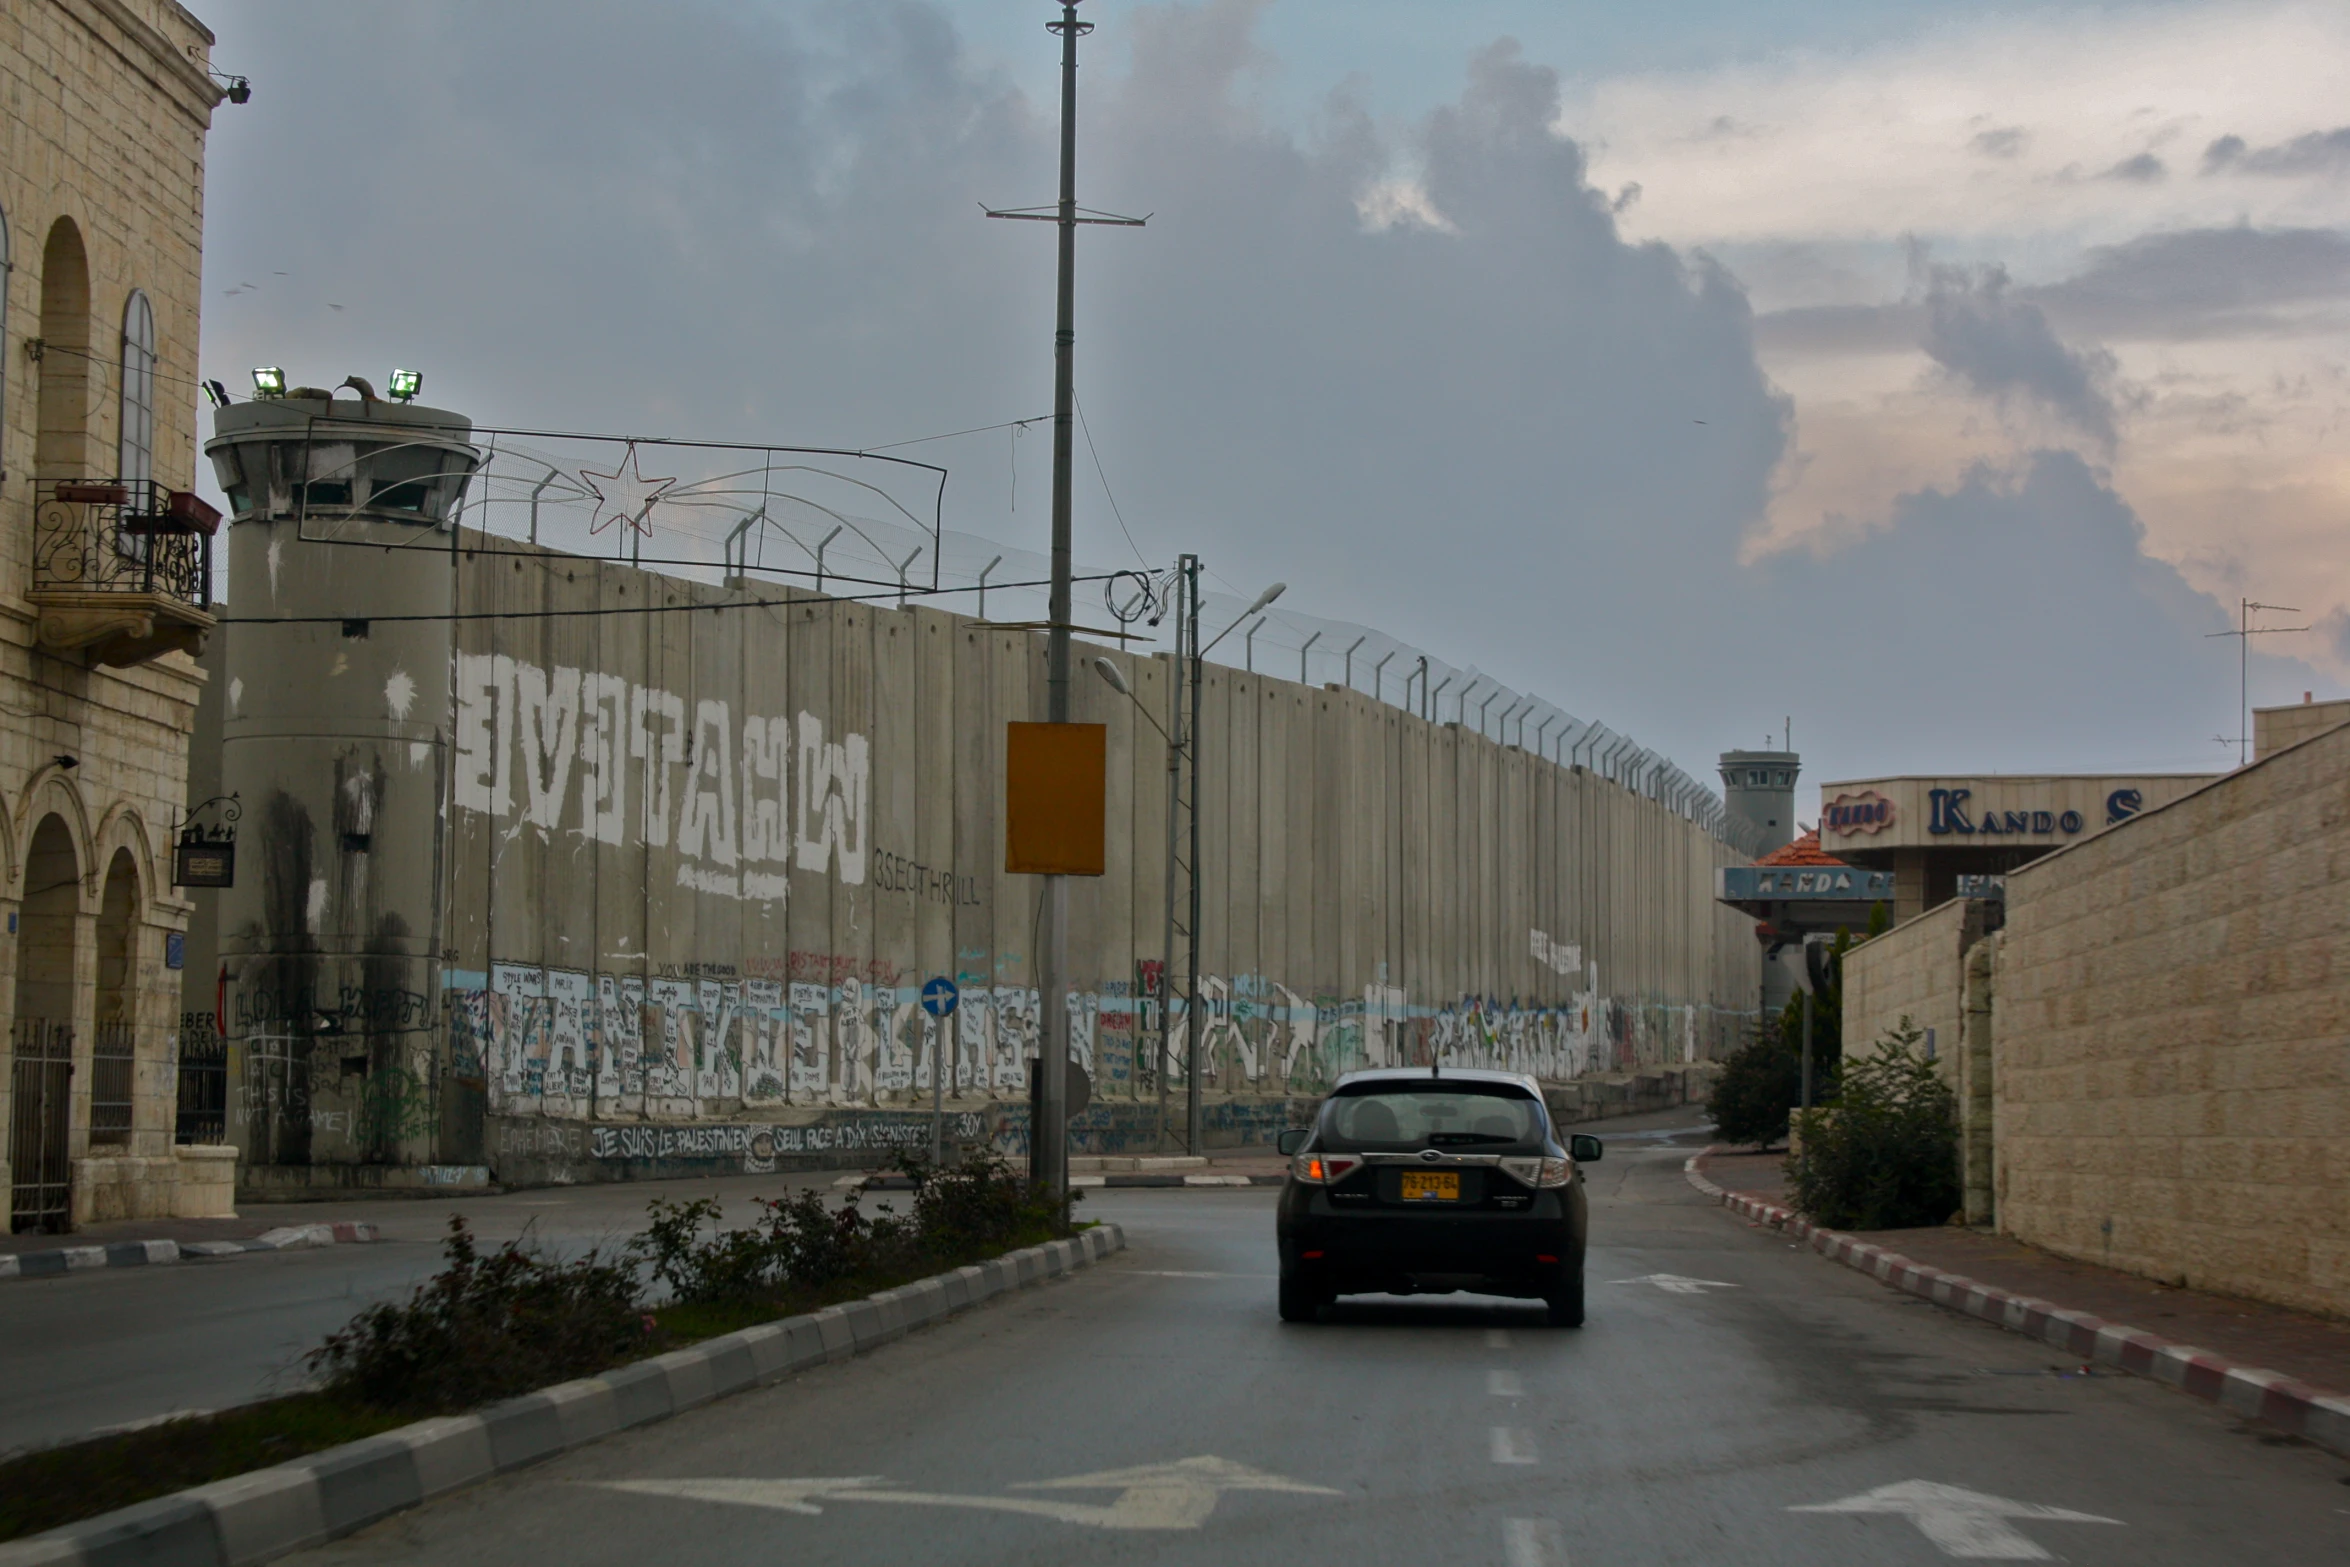 a view from the street looking towards a prison wall